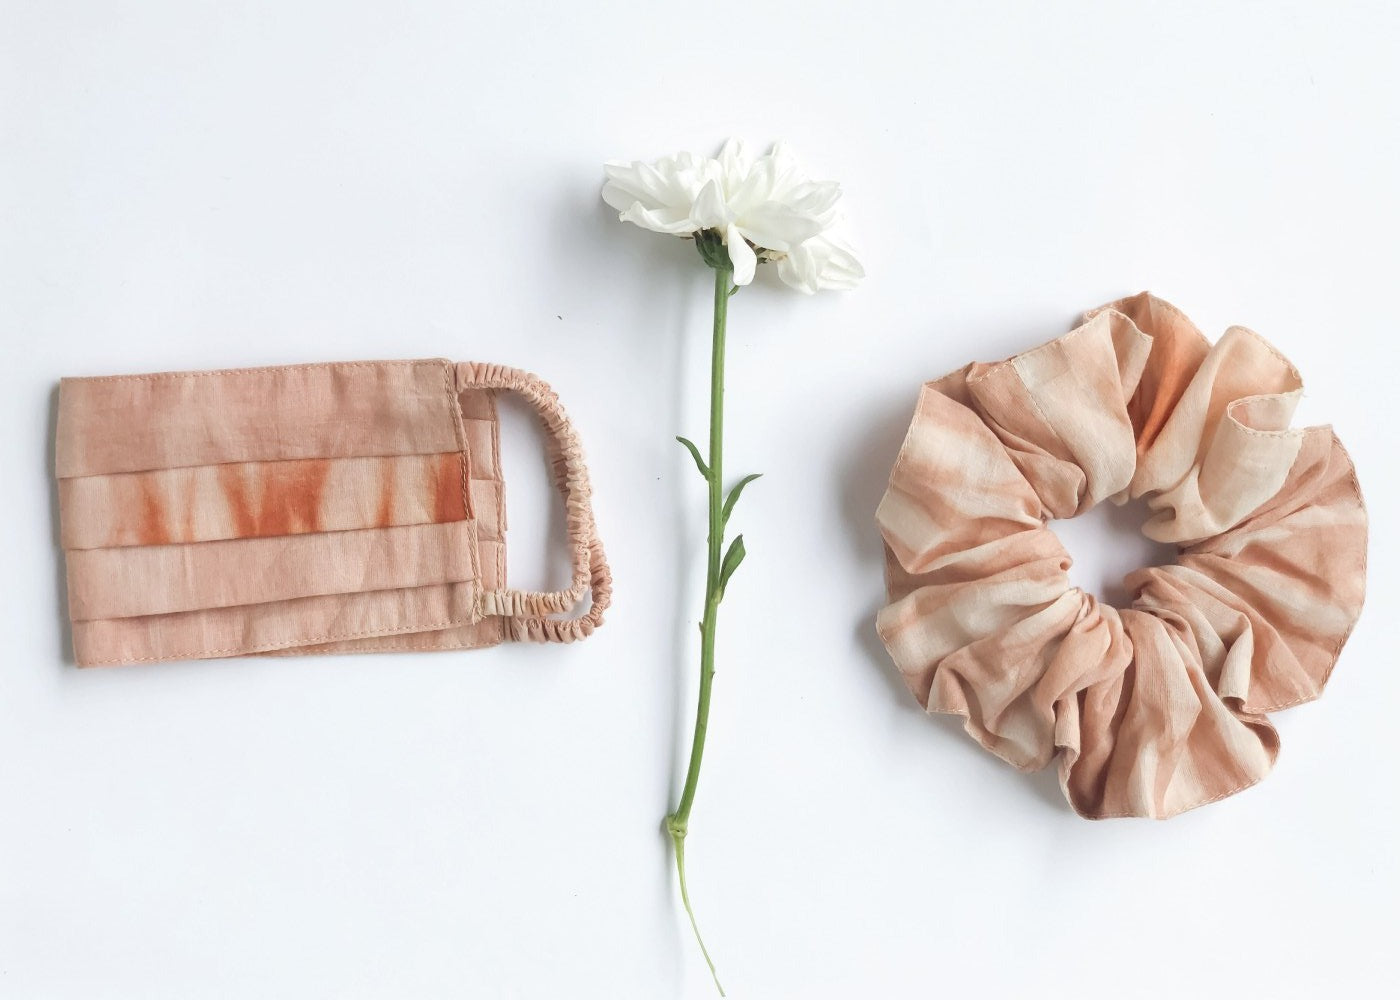 Two-ply, naturally dyed mask and scrunchie set made from fabric remnants. organic cotton lining